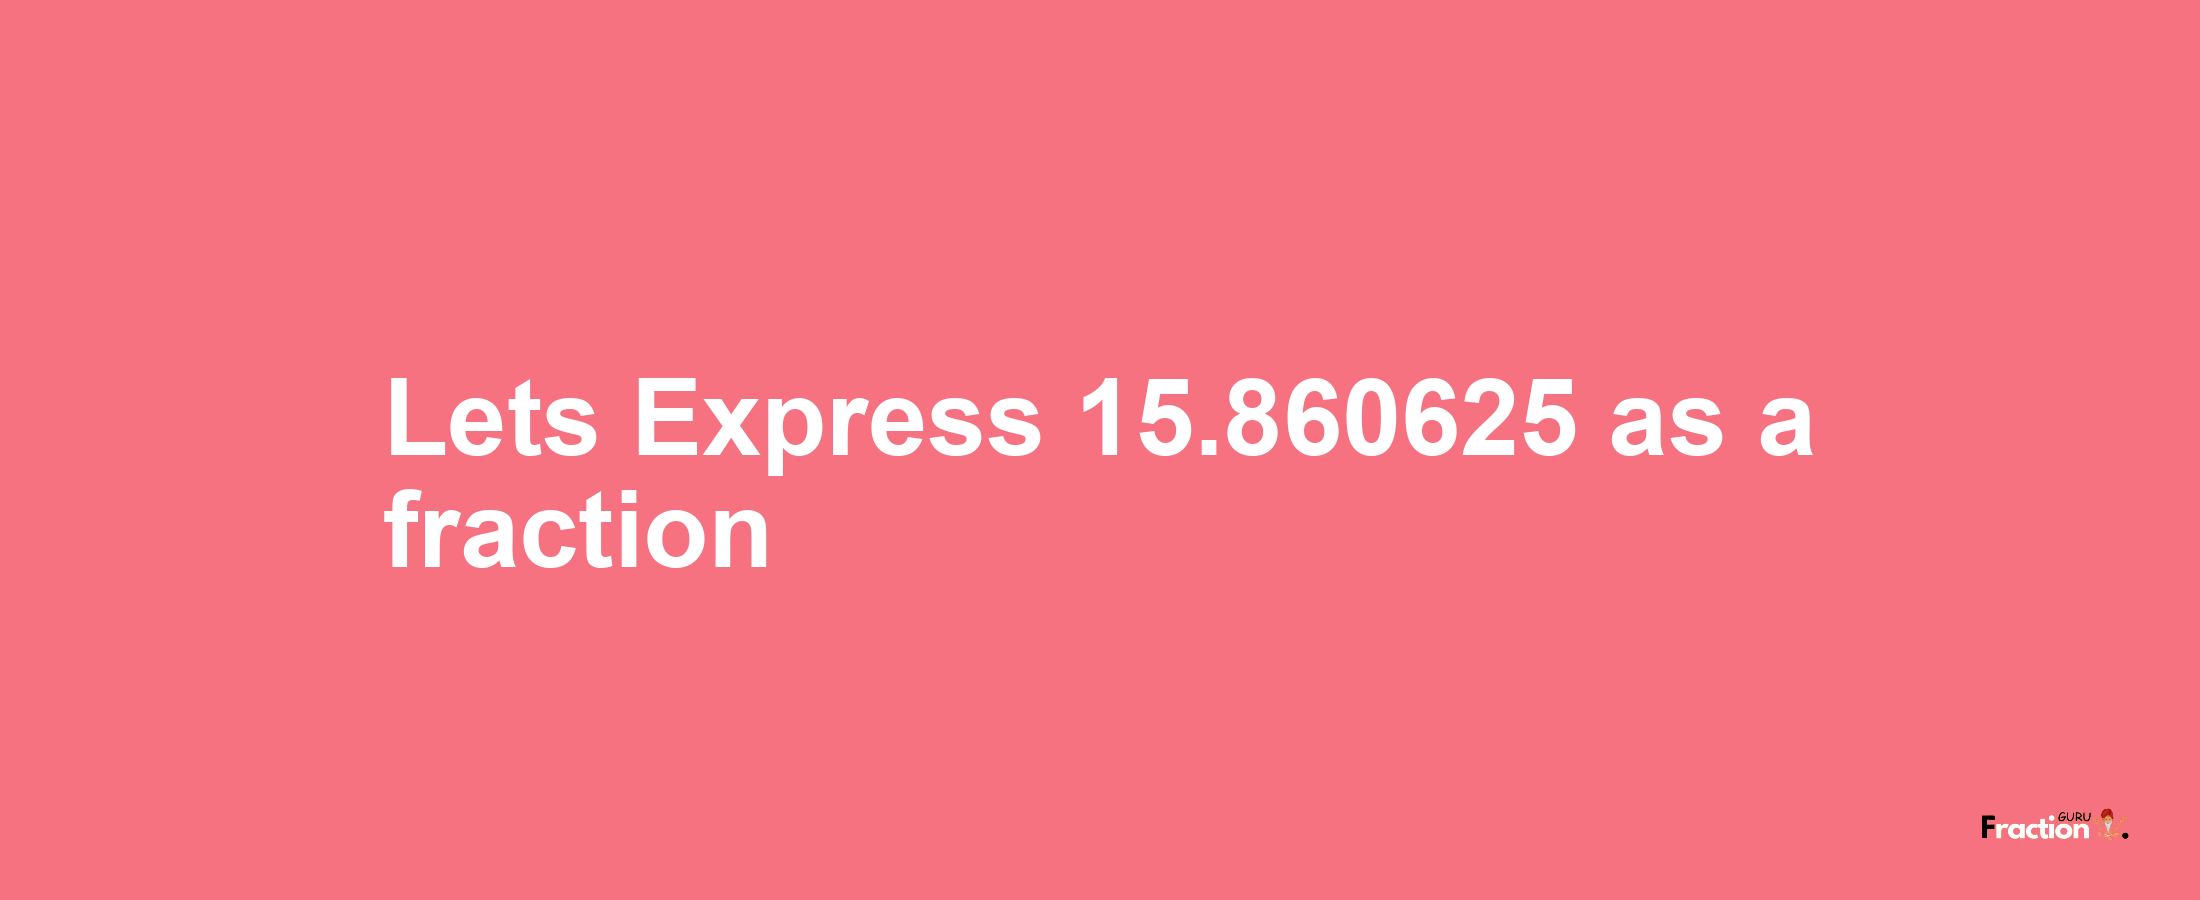 Lets Express 15.860625 as afraction